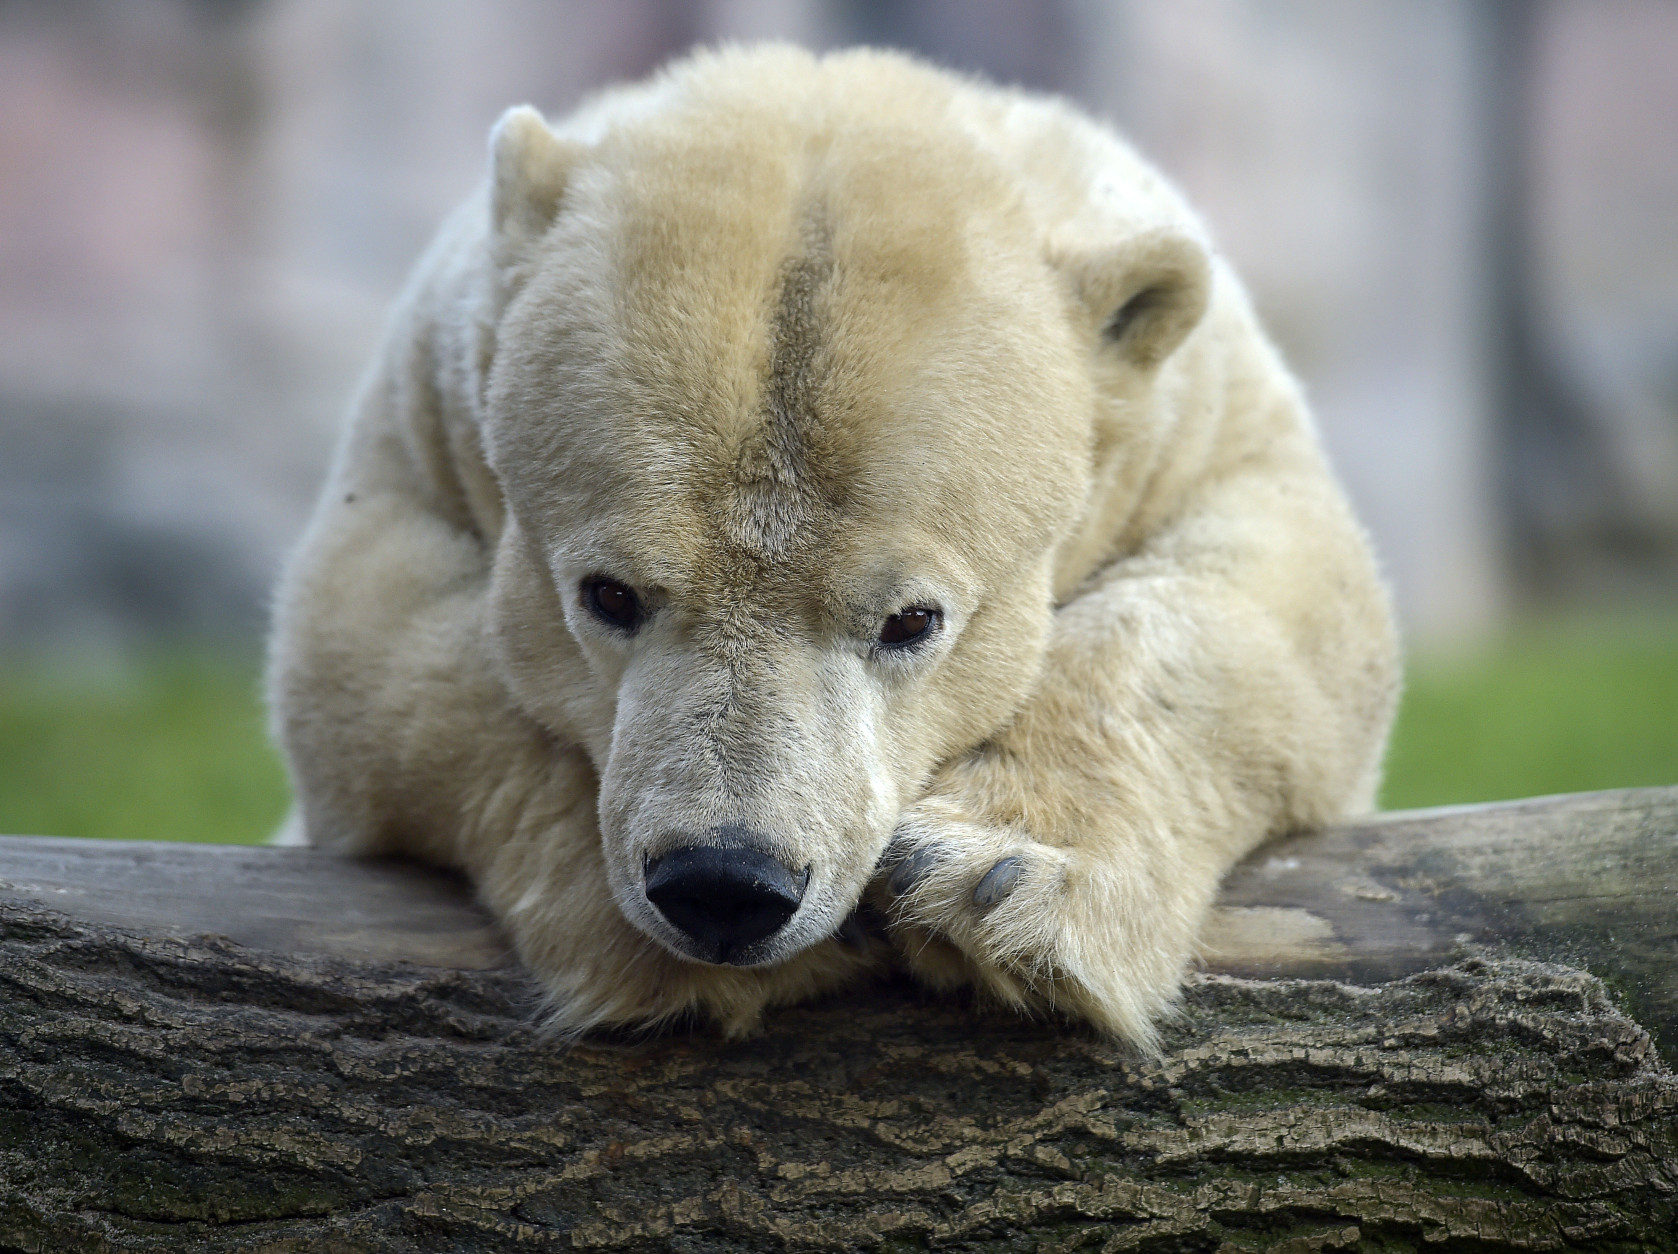 Little handicapped  female polar bear Antonia rests on a trunk on a cold day at the zoo in Gelsenkirchen, Germany, Tuesday, Jan. 6, 2015. The oldest bear in the zoo is 25 years old, but due to her dwarfism,  it  measures only 1.35 meters compared to 2.20 meter of her fellows. (AP Photo/Martin Meissner)